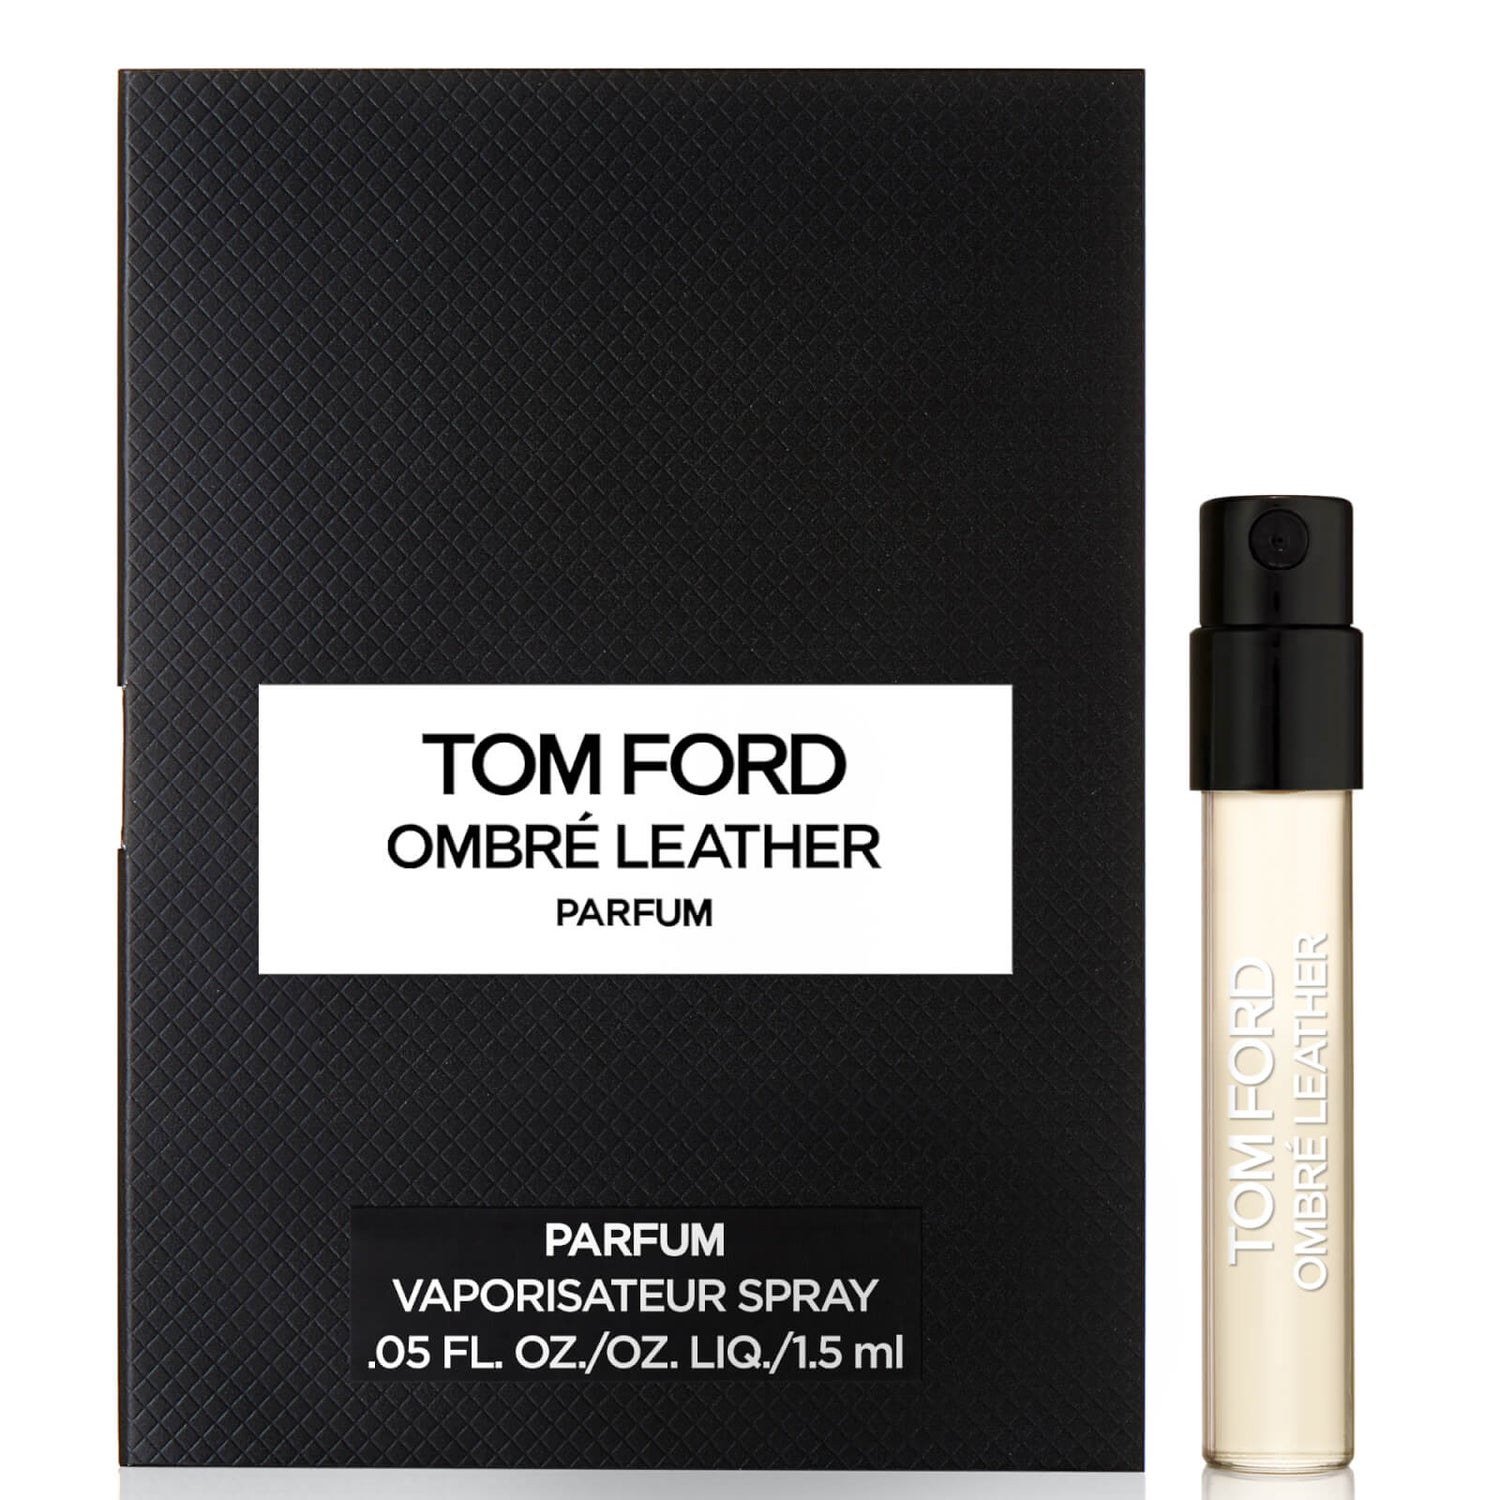 Tom Ford Ombre Leather Parfum 1.5ml - LOOKFANTASTIC